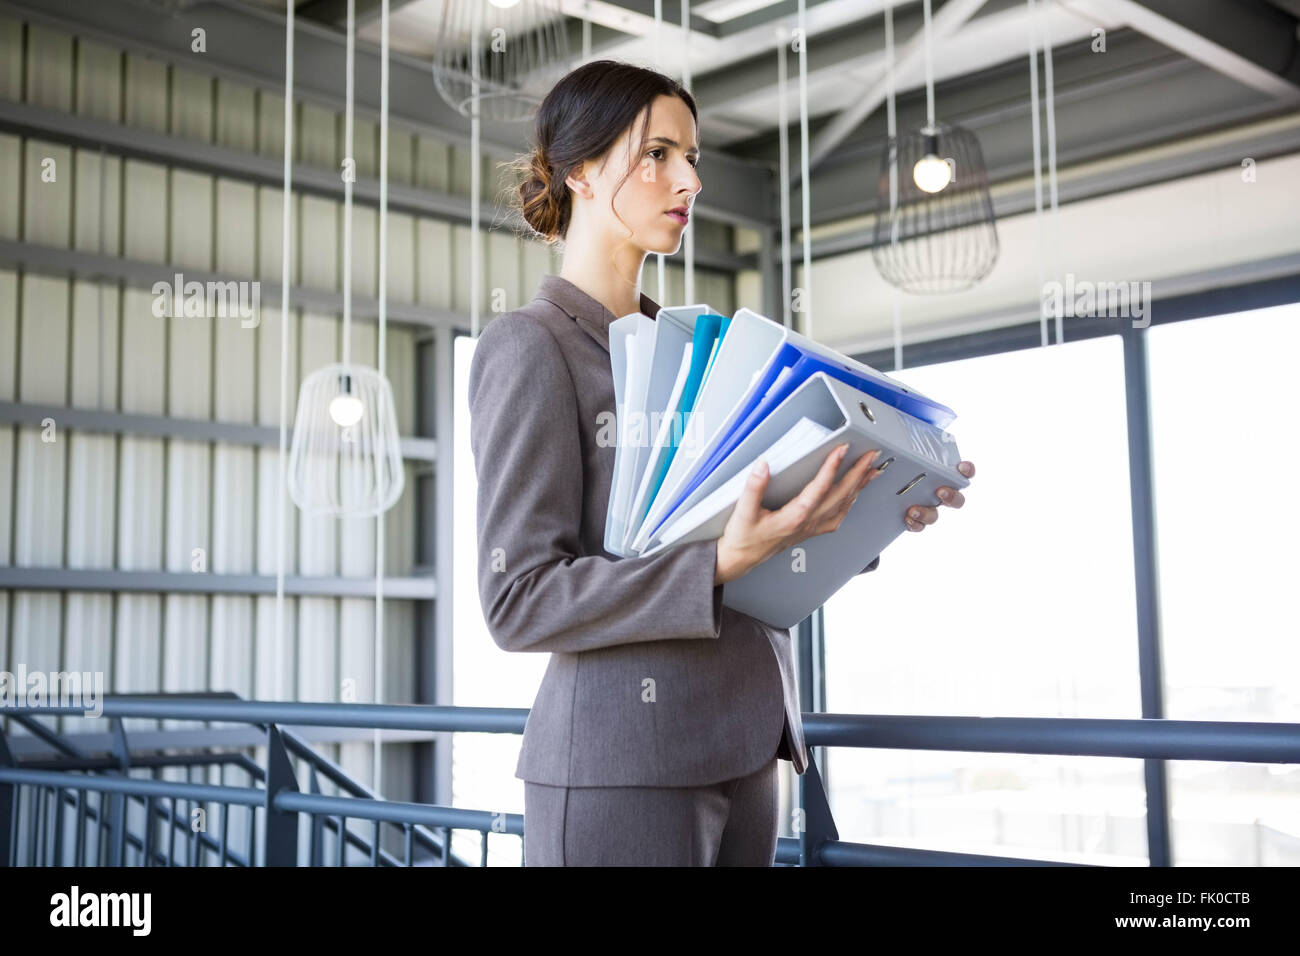 Tired overworked busy businesswoman Stock Photo